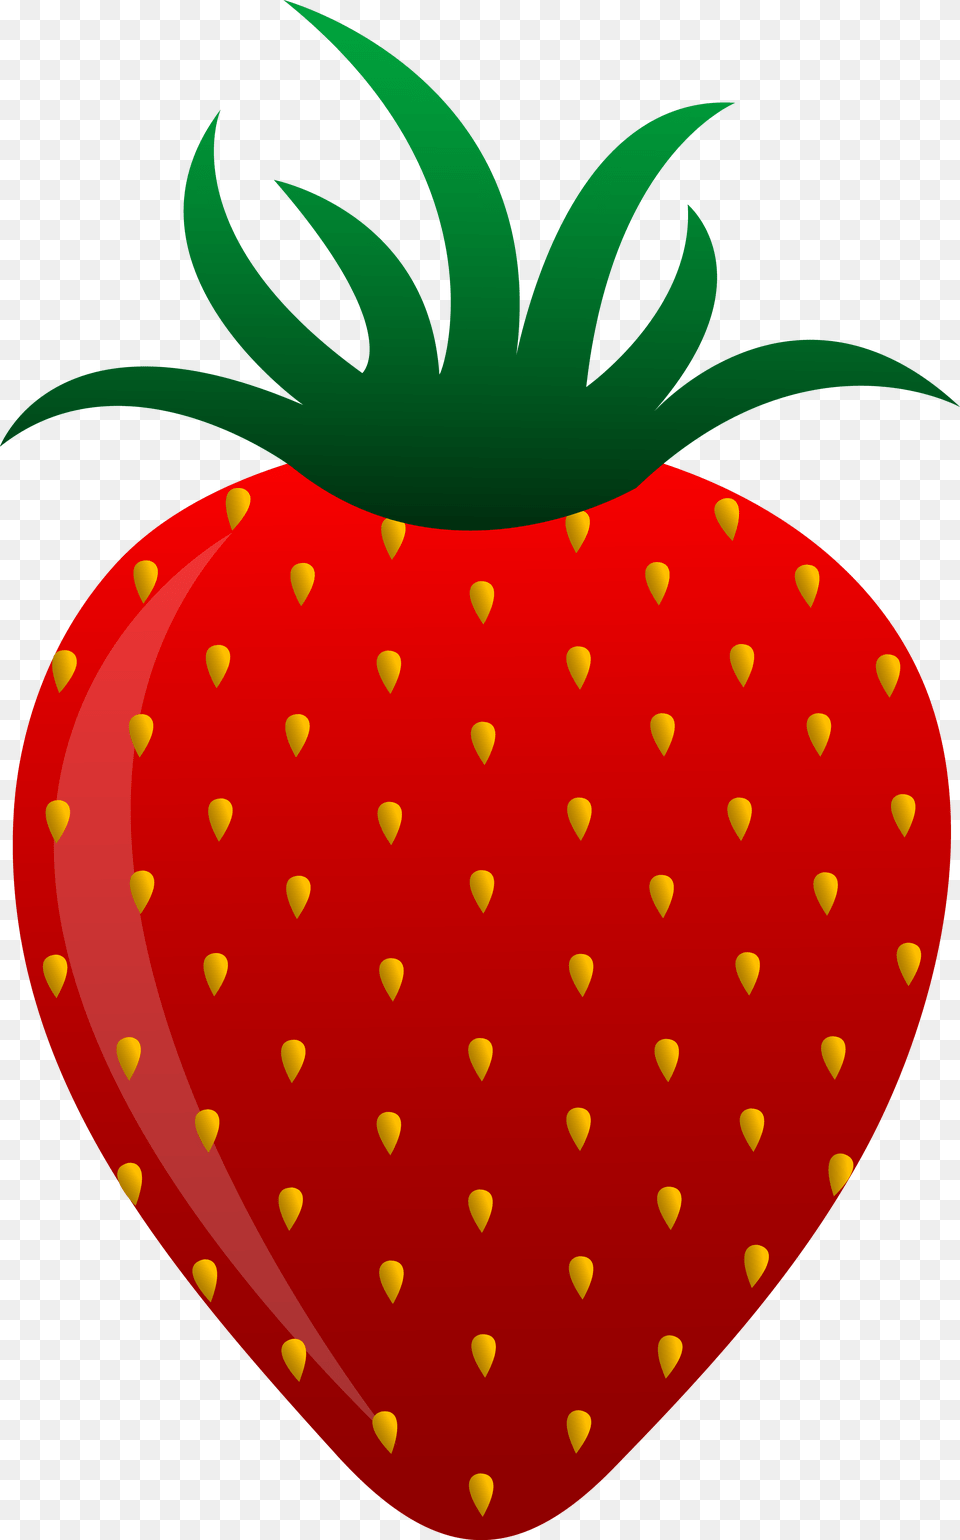 Strawberries Strawberry, Berry, Food, Fruit, Plant Png Image